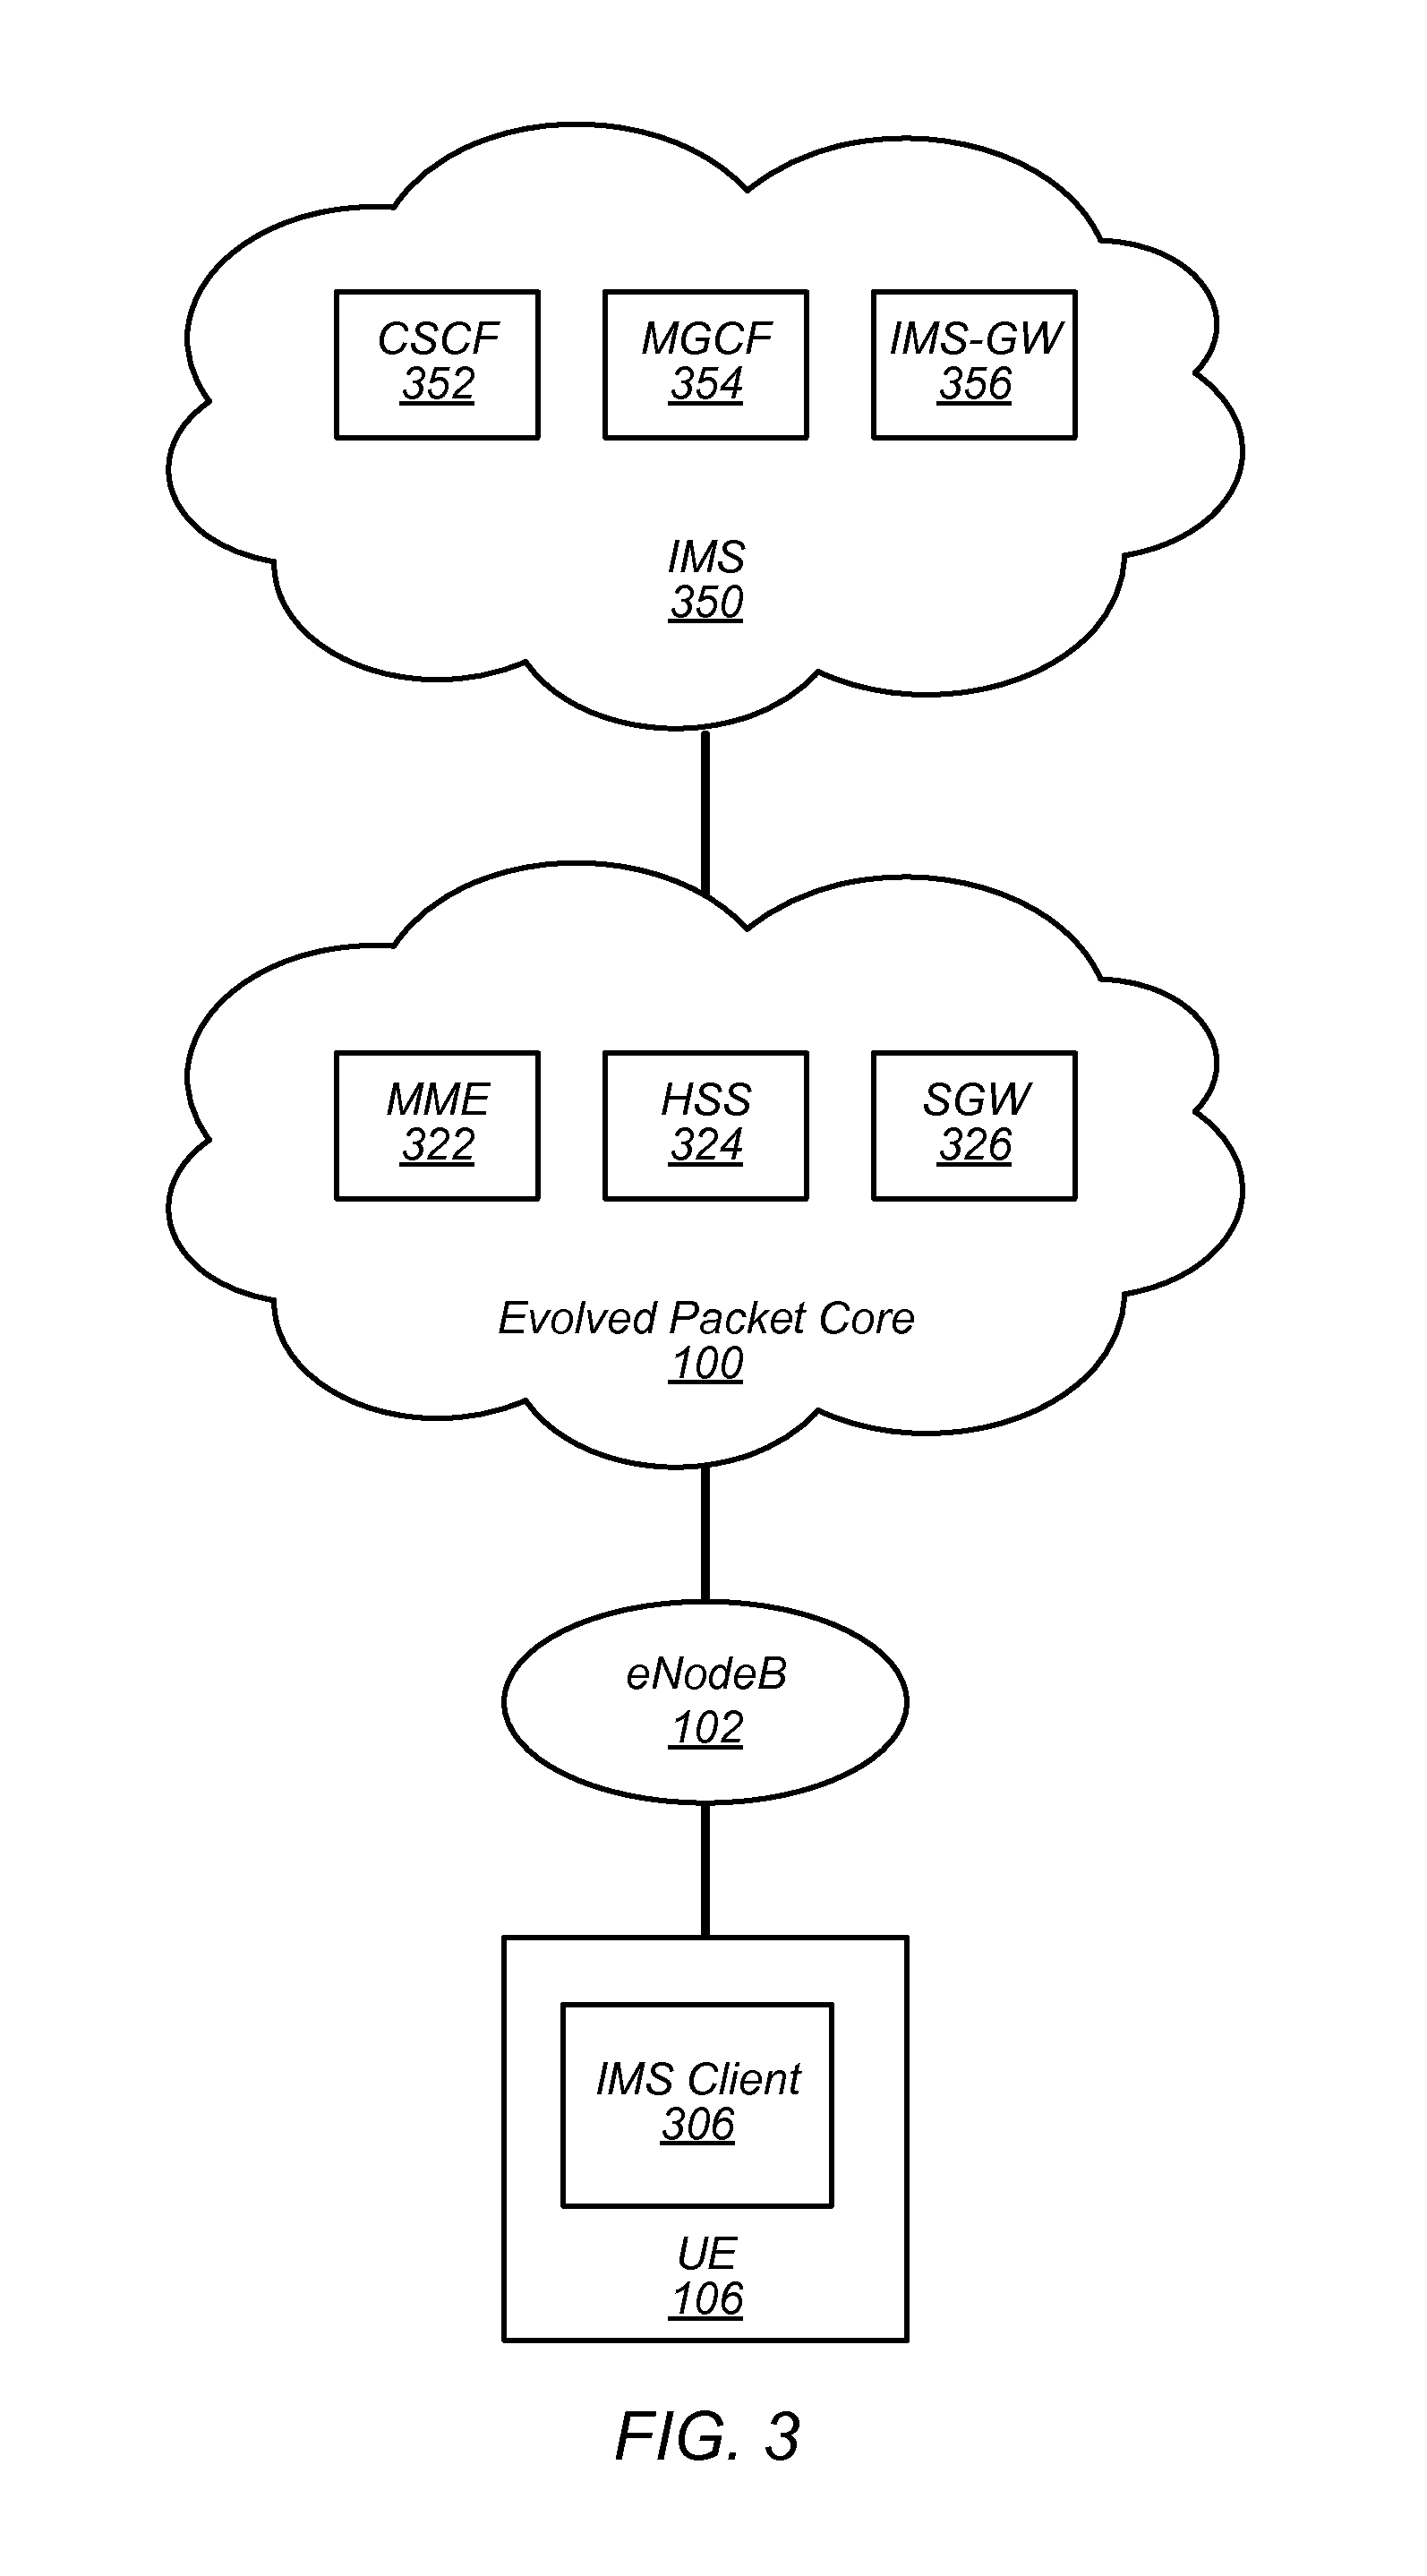 Enhanced Voice Roaming for UE Devices Associated with a Home Network without SRVCC